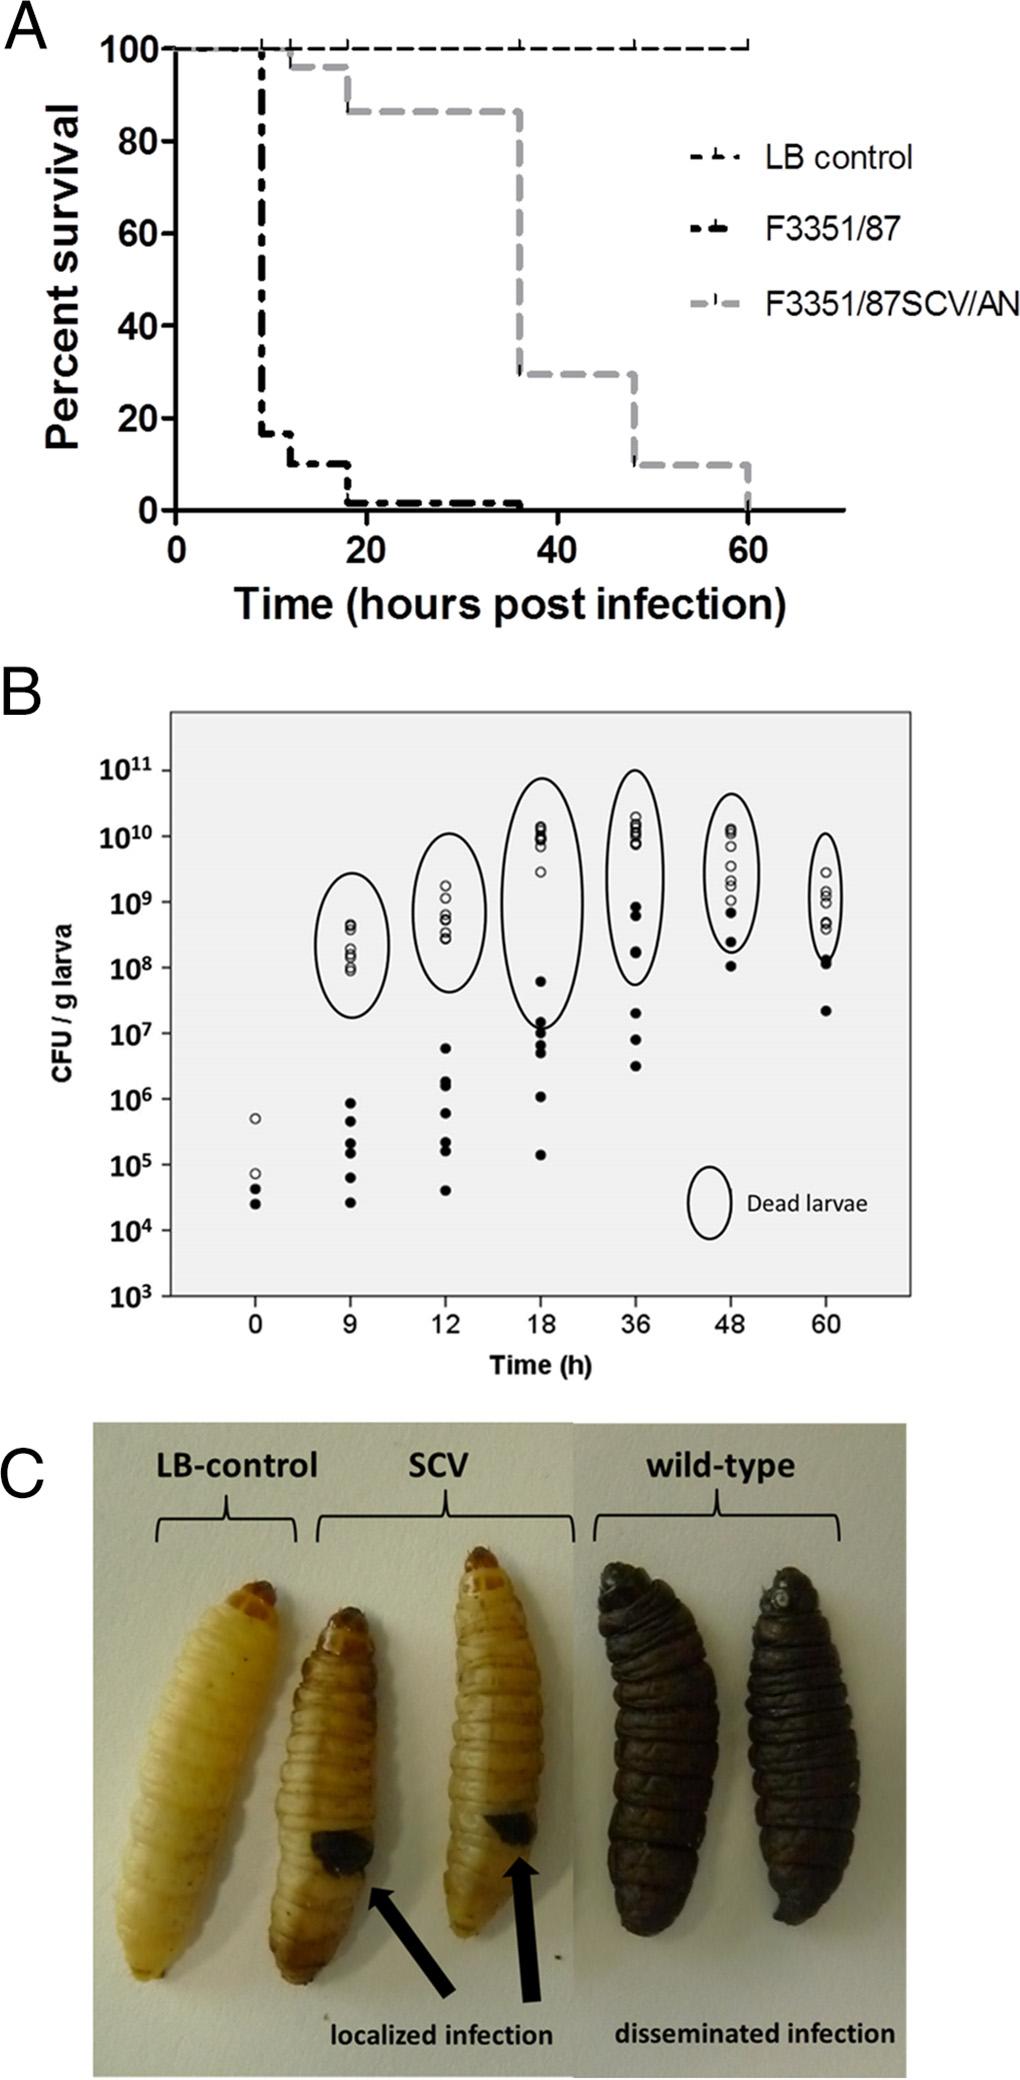 Frenzel et al. FIG 5 A reduced multiplication rate of SCVs is correlated with attenuated virulence and persistence in the G. mellonella model of bacterial infection.